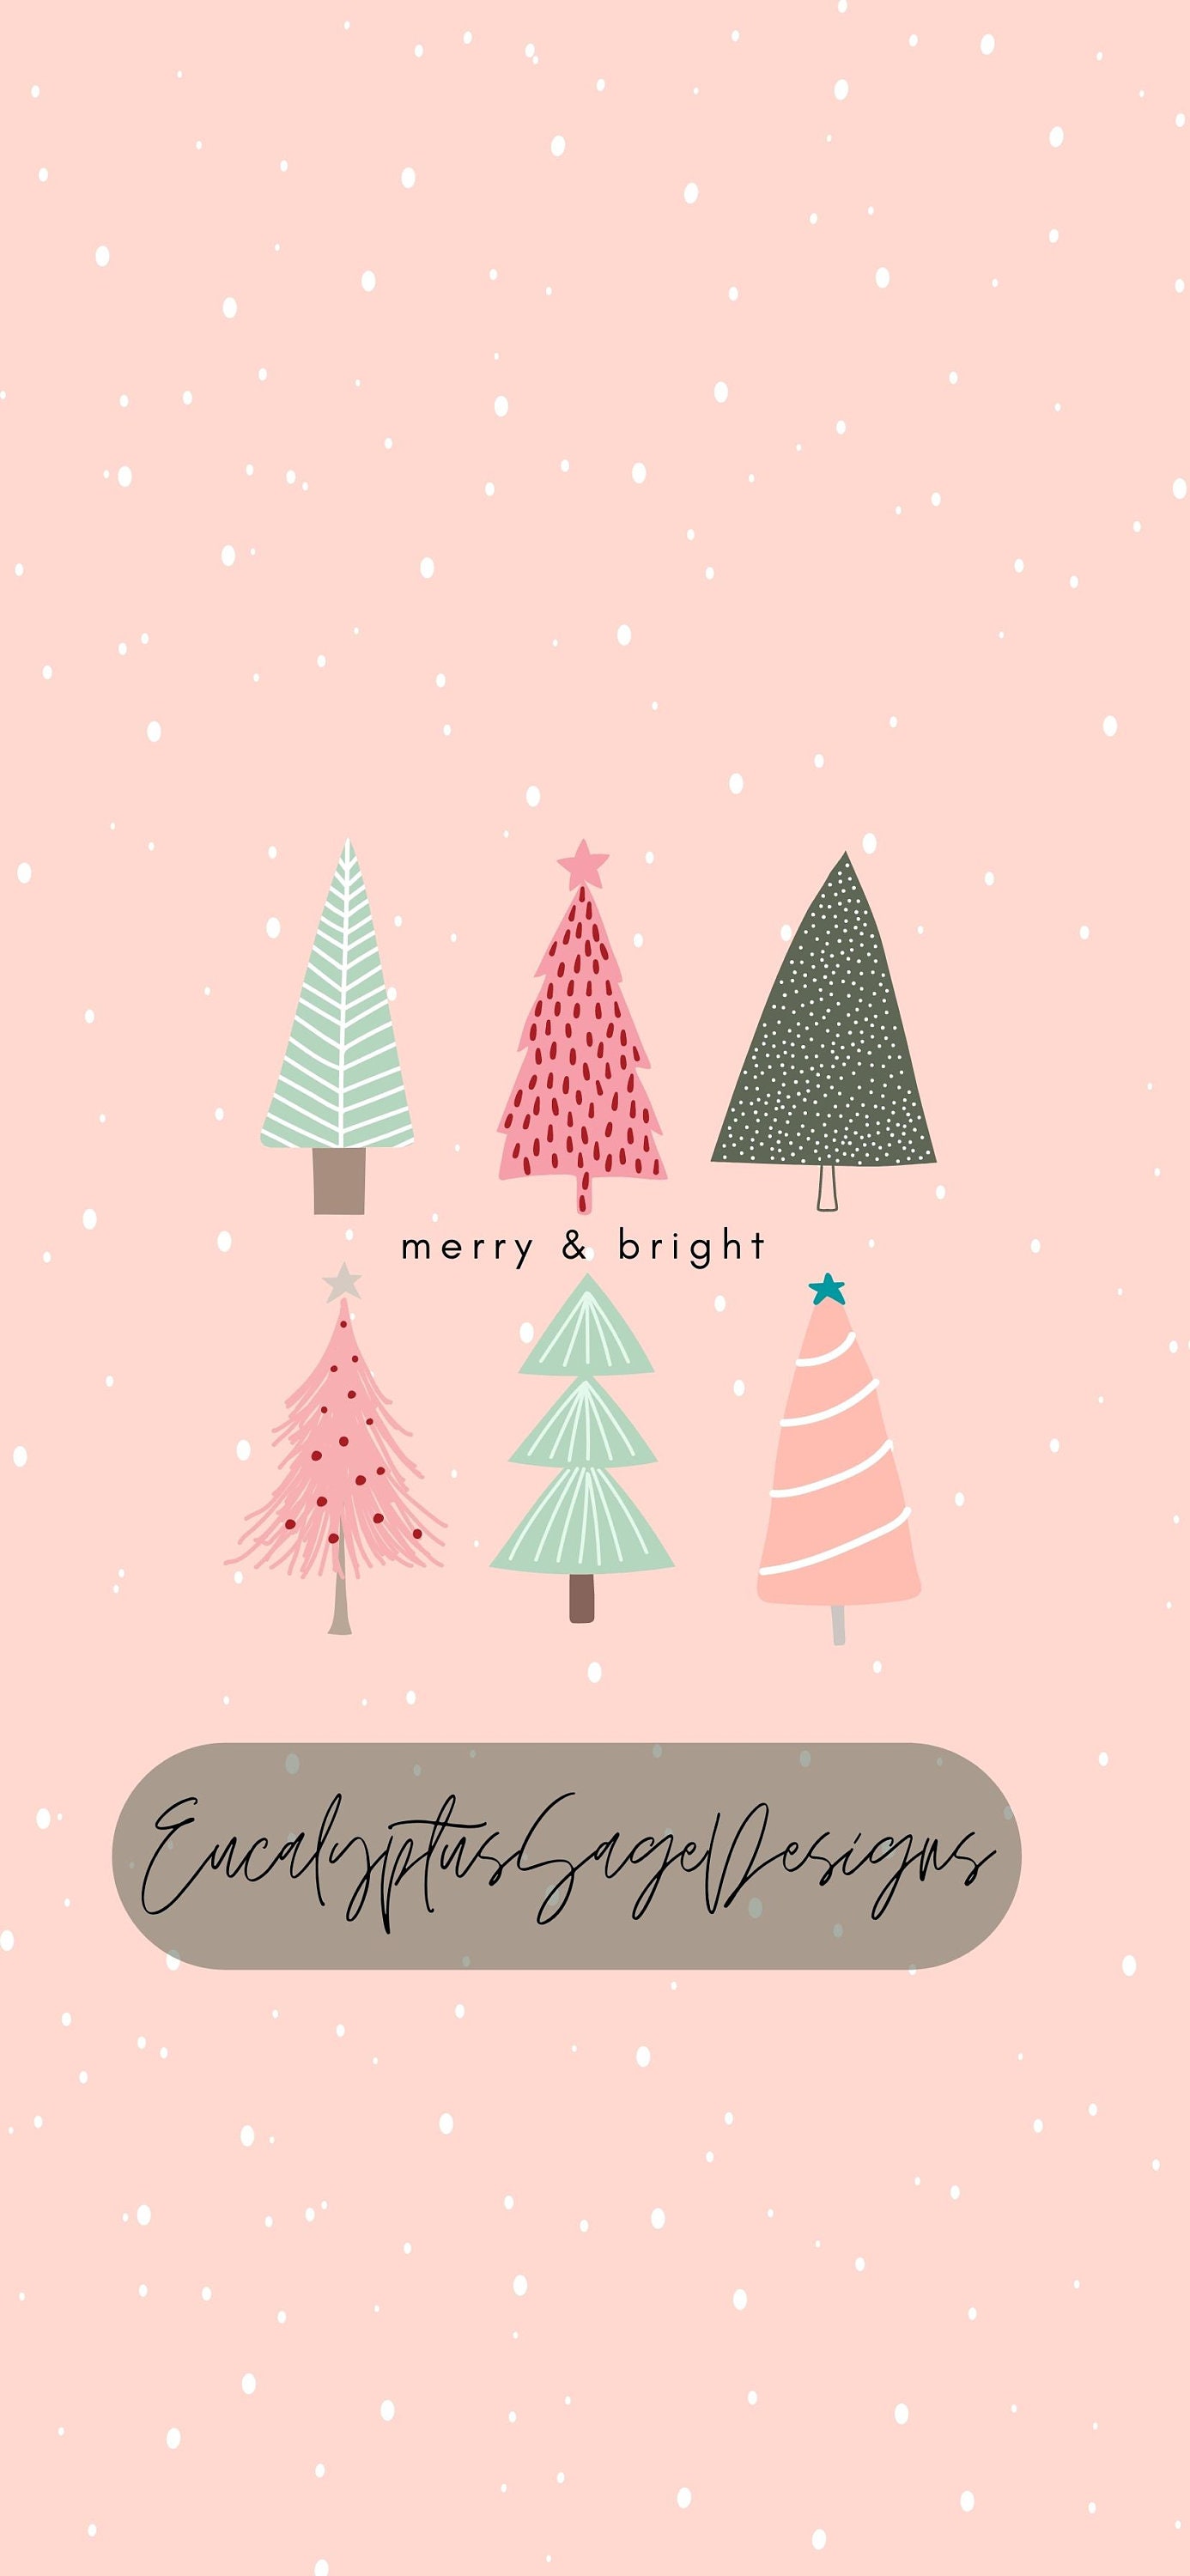 A christmas card with trees and snowflakes - White Christmas